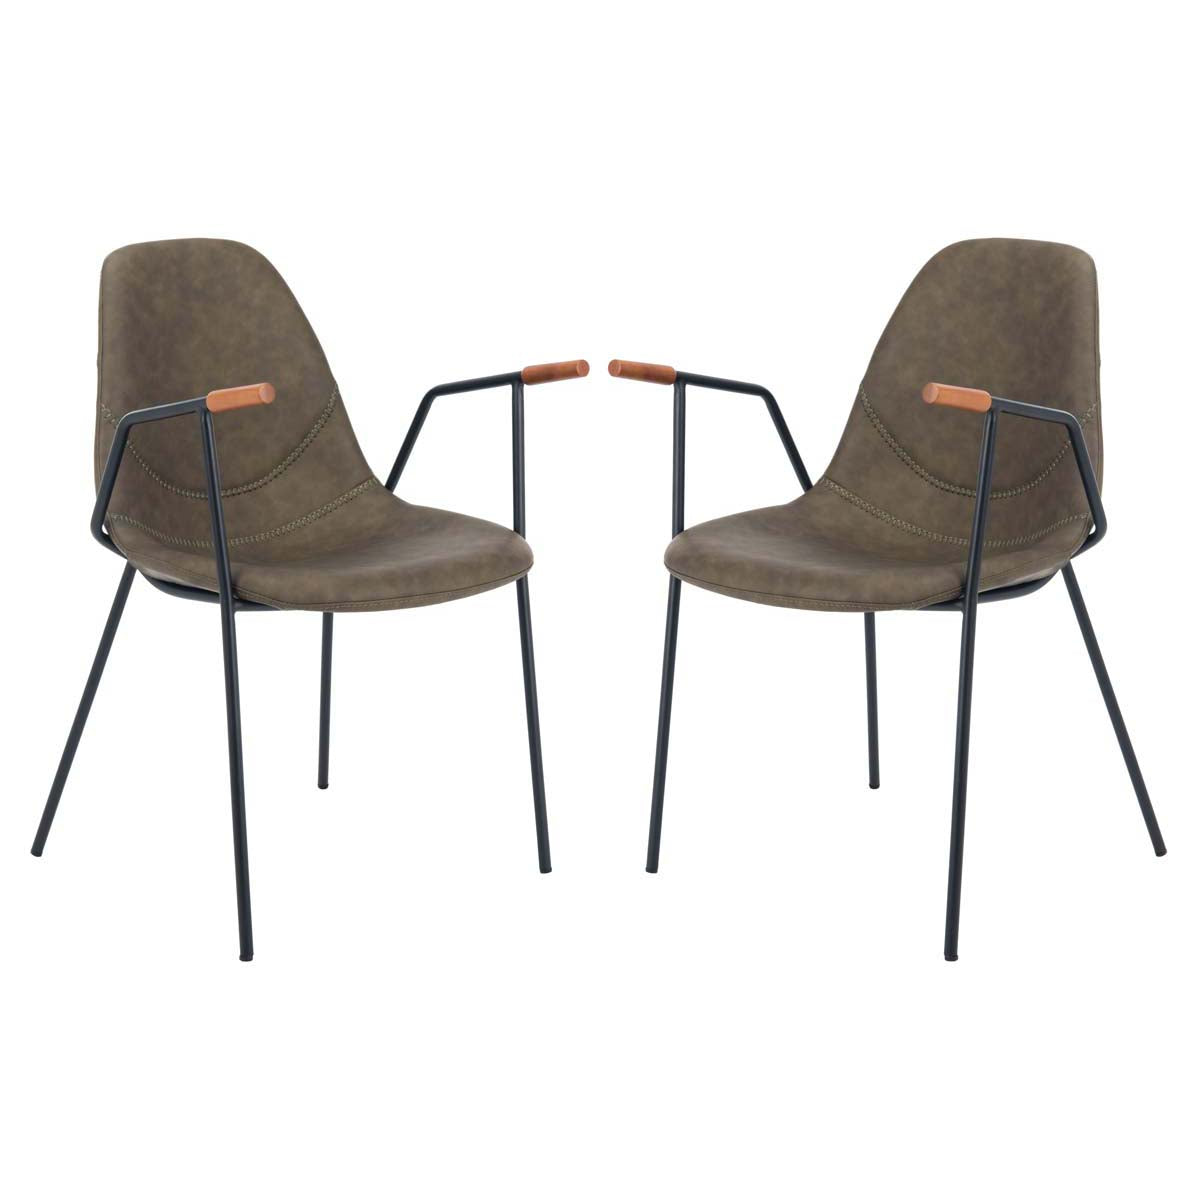 Safavieh Tanner Mid Century Dining Chair, DCH3001 - Olive Pu/Black (Set of 2)